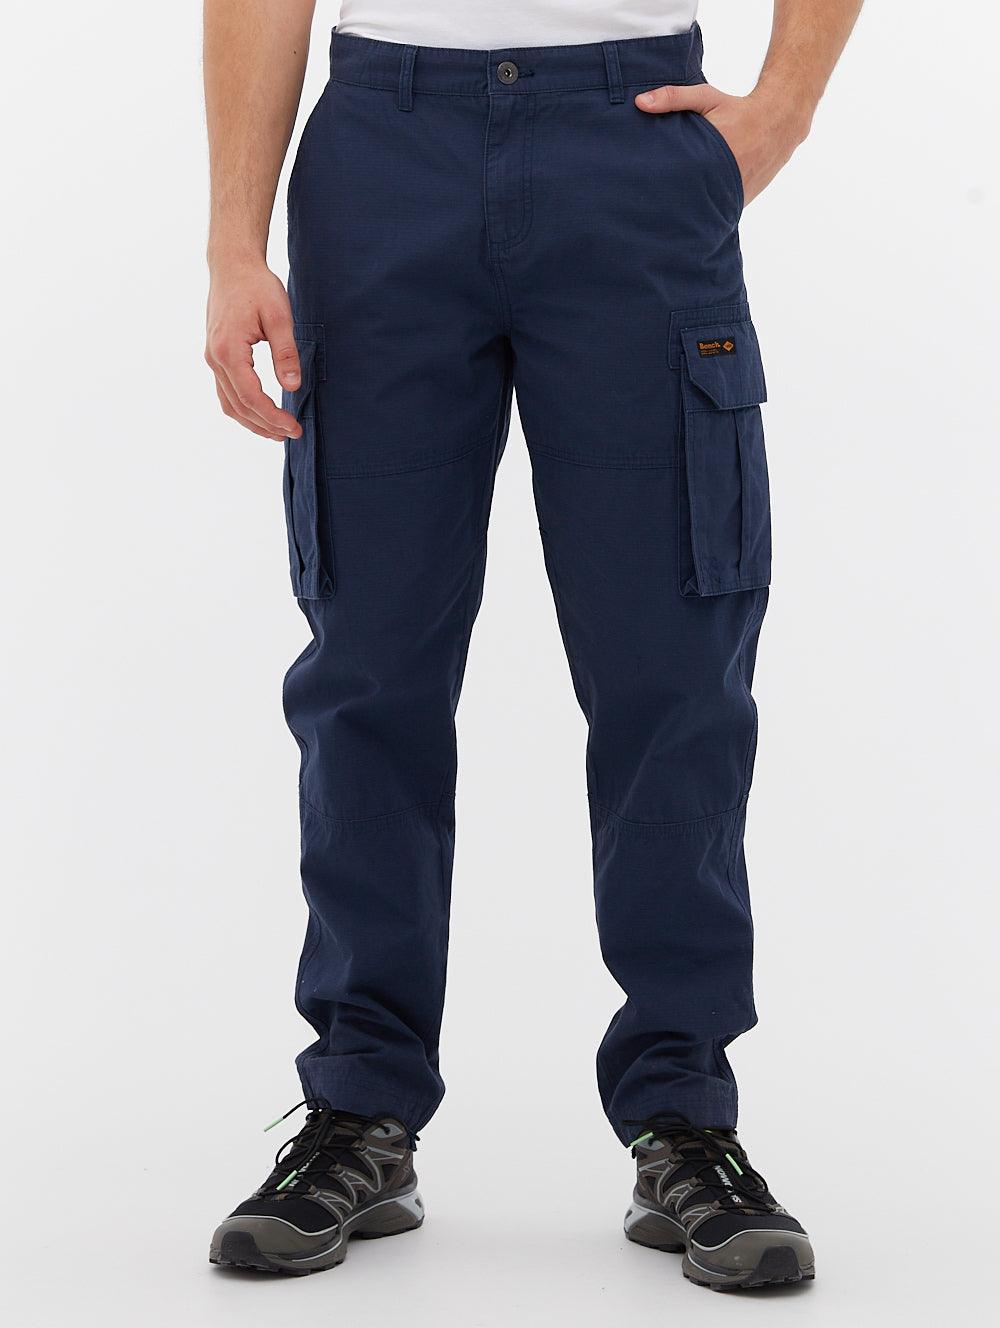 Men's Bench Pants, Slacks and Chinos from $40 | Lyst